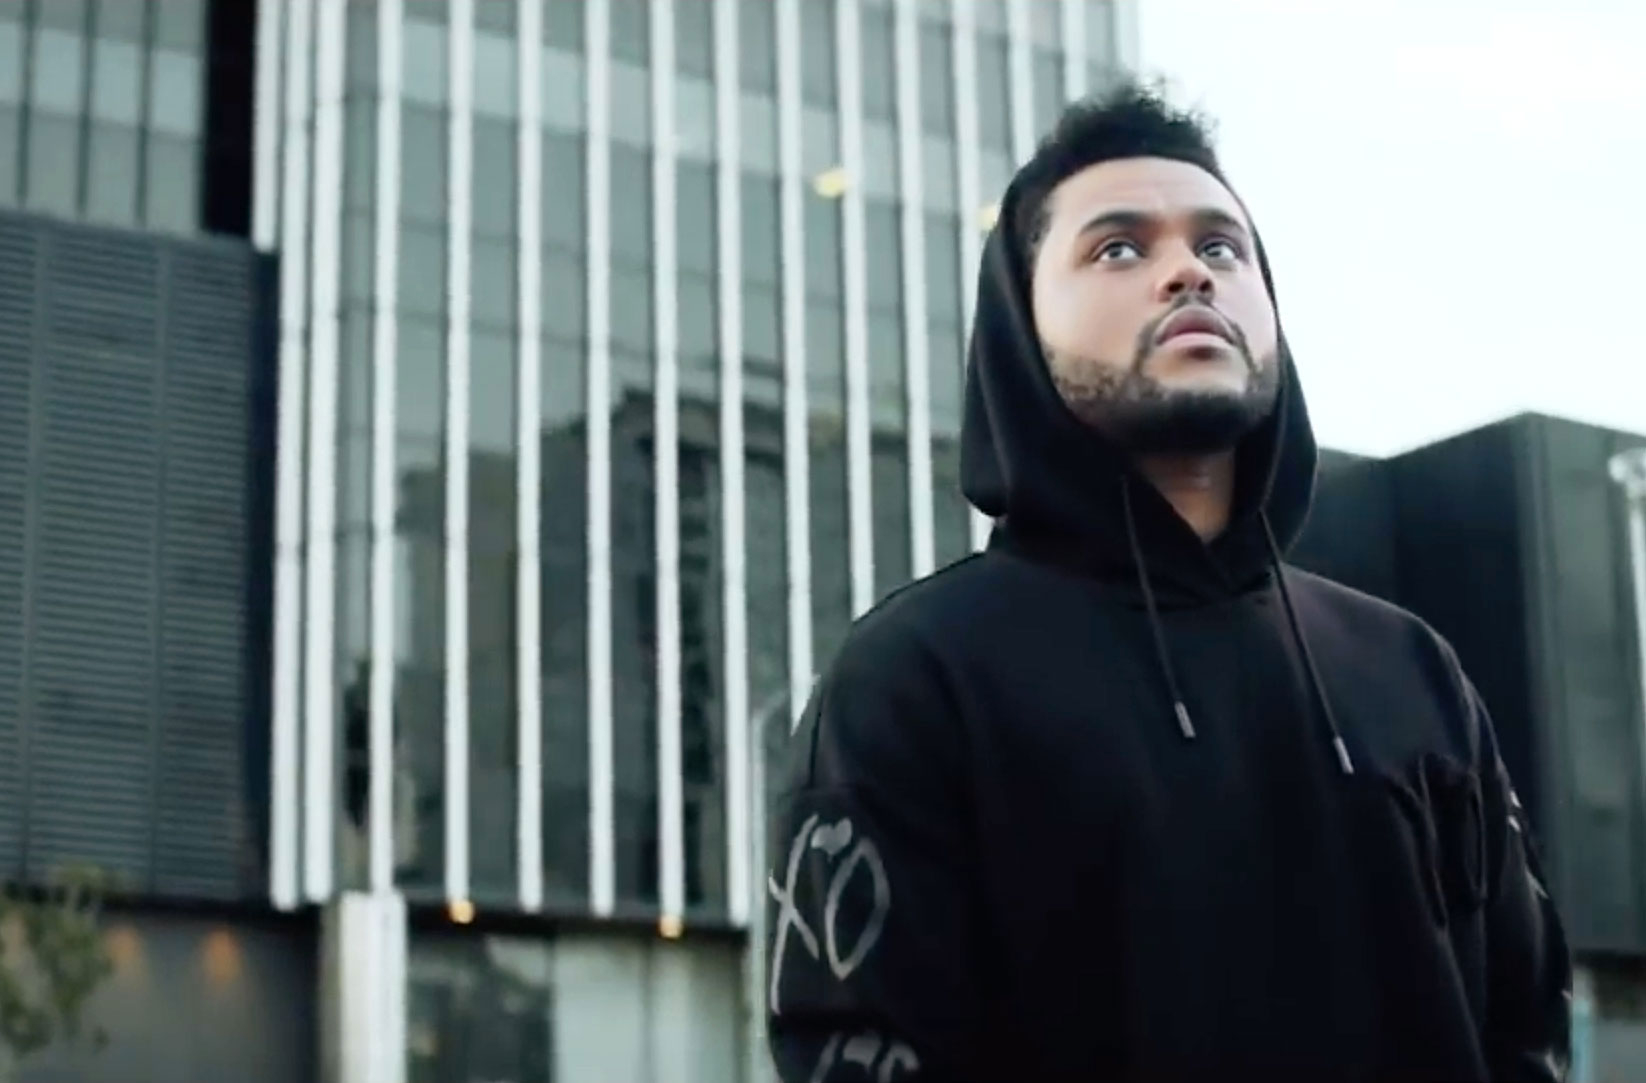 The Weeknd's H&M Collection: Watch the Video